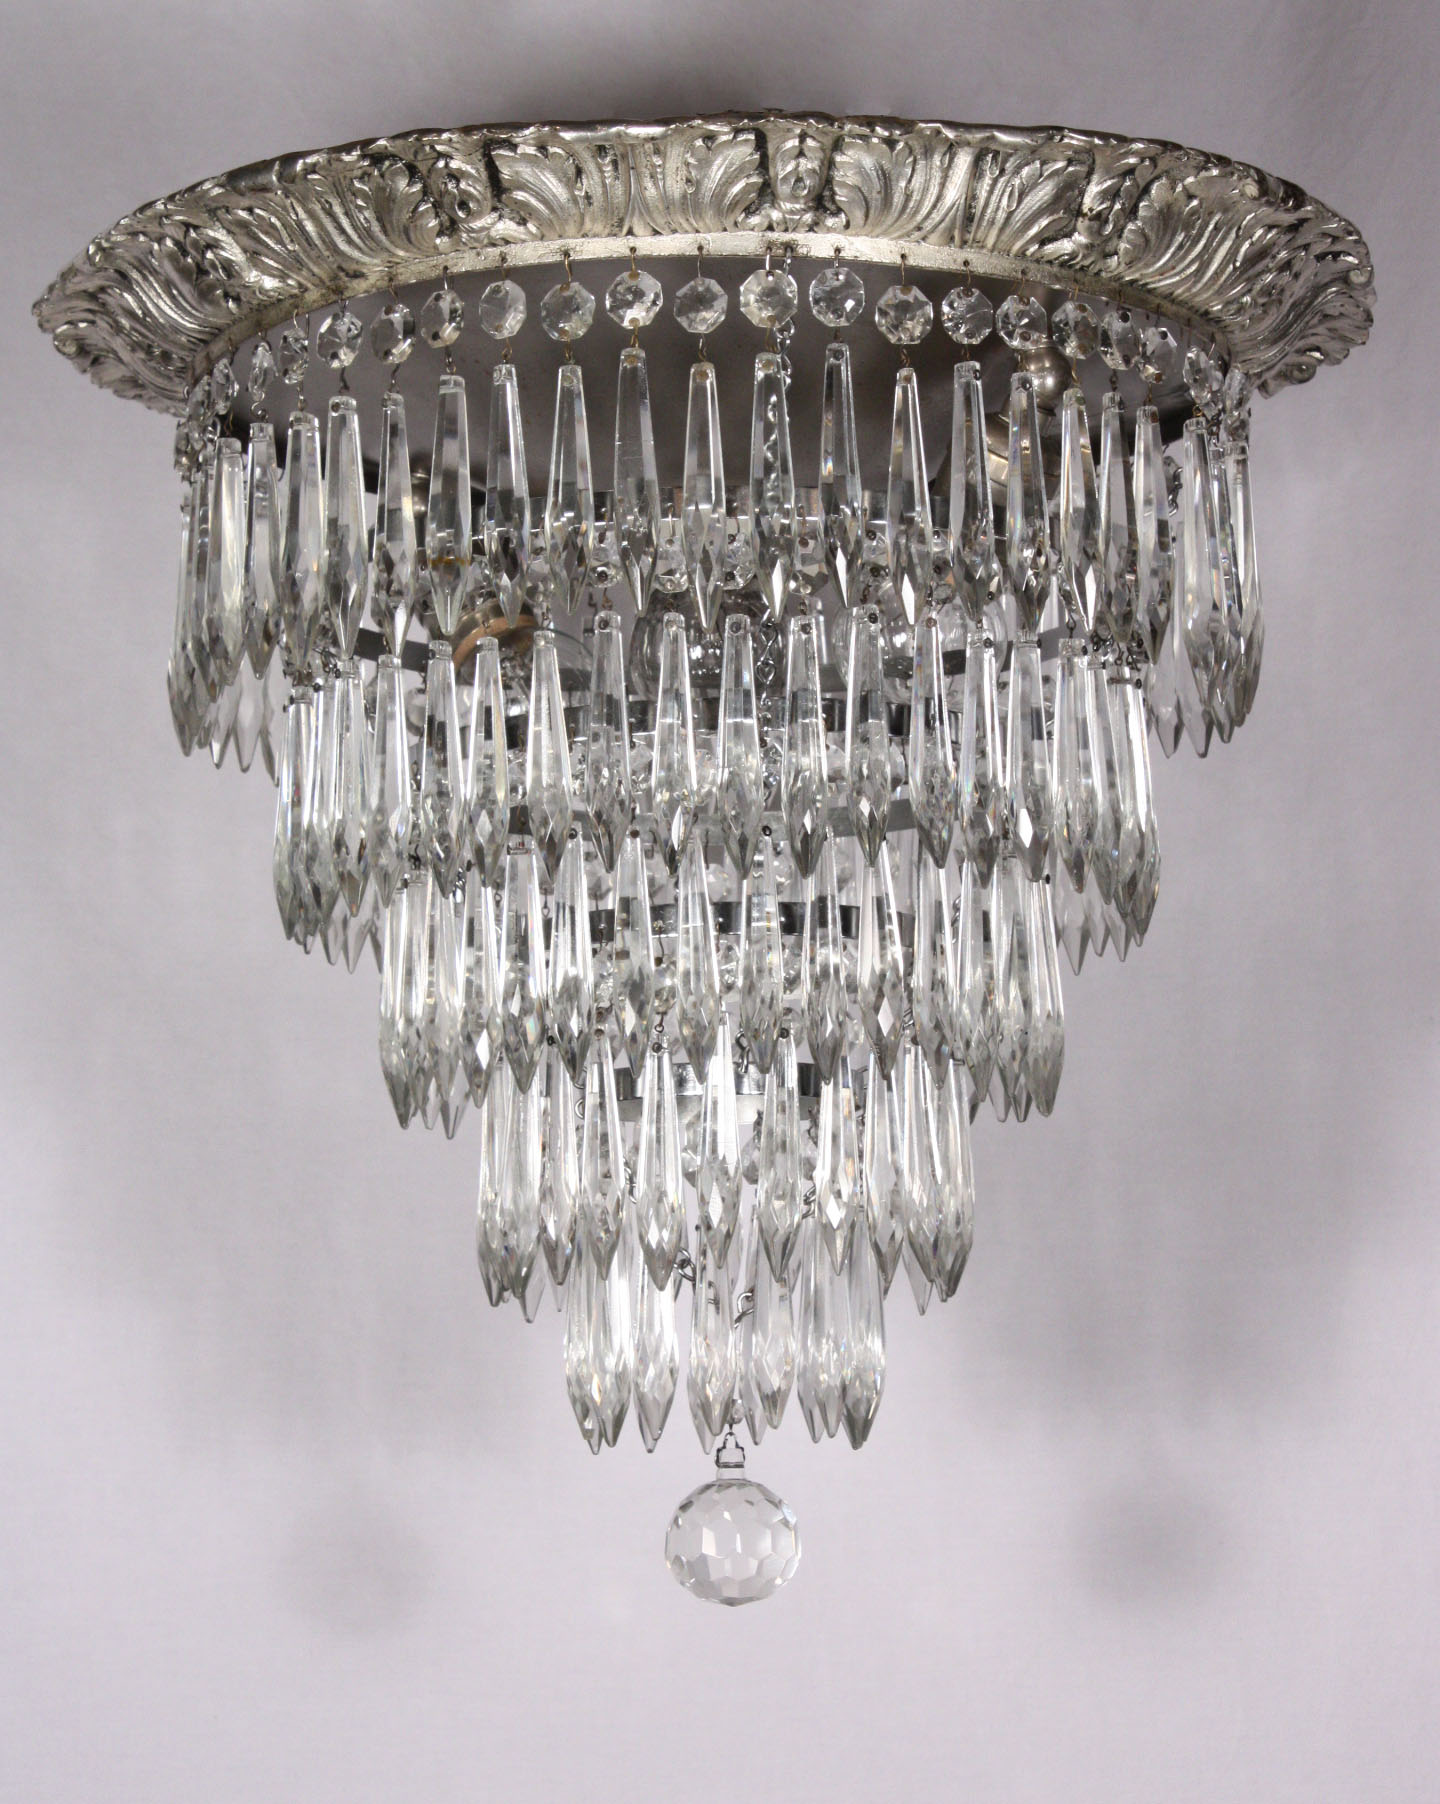 SOLD Wonderful Antique Neoclassical Five-Tier Chandelier, Silver Plated, Flush Mount-18747